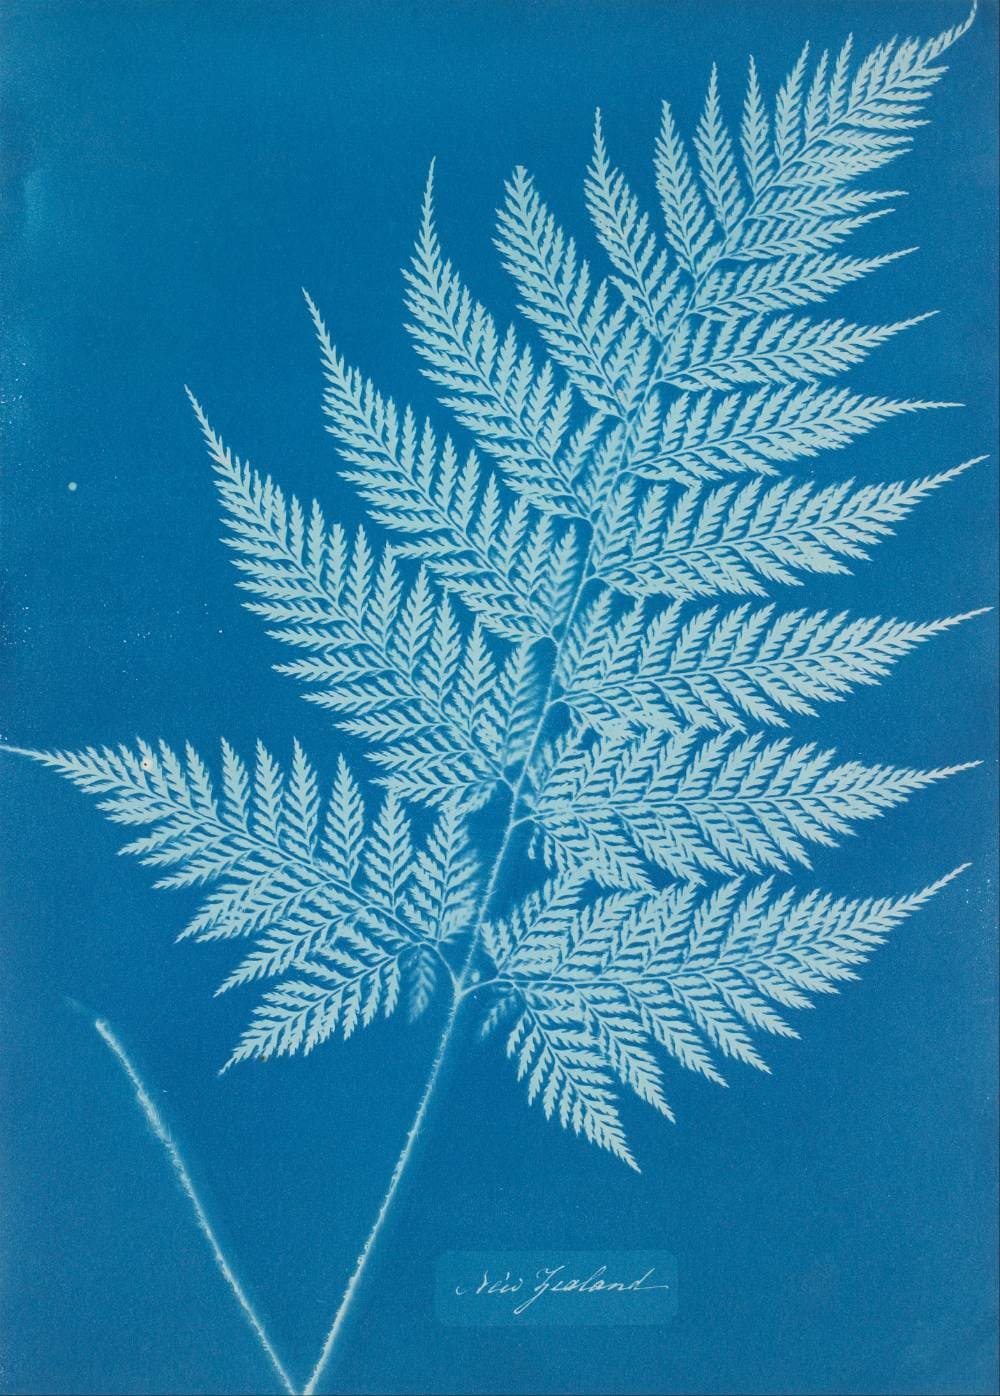 Historical Cyanotype by Anna Atkins from the first photography book